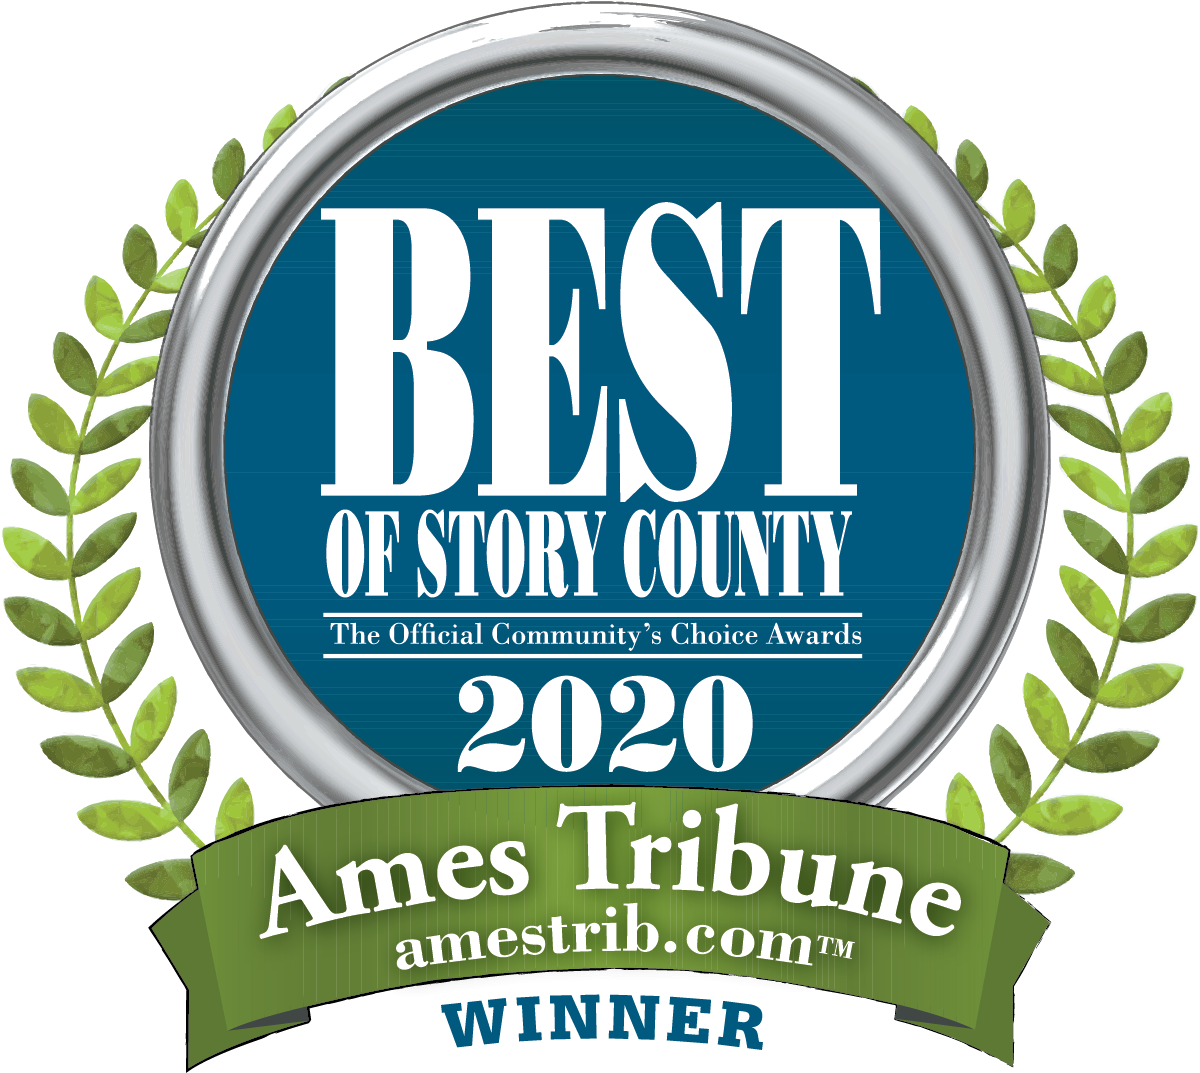 Best of Story County